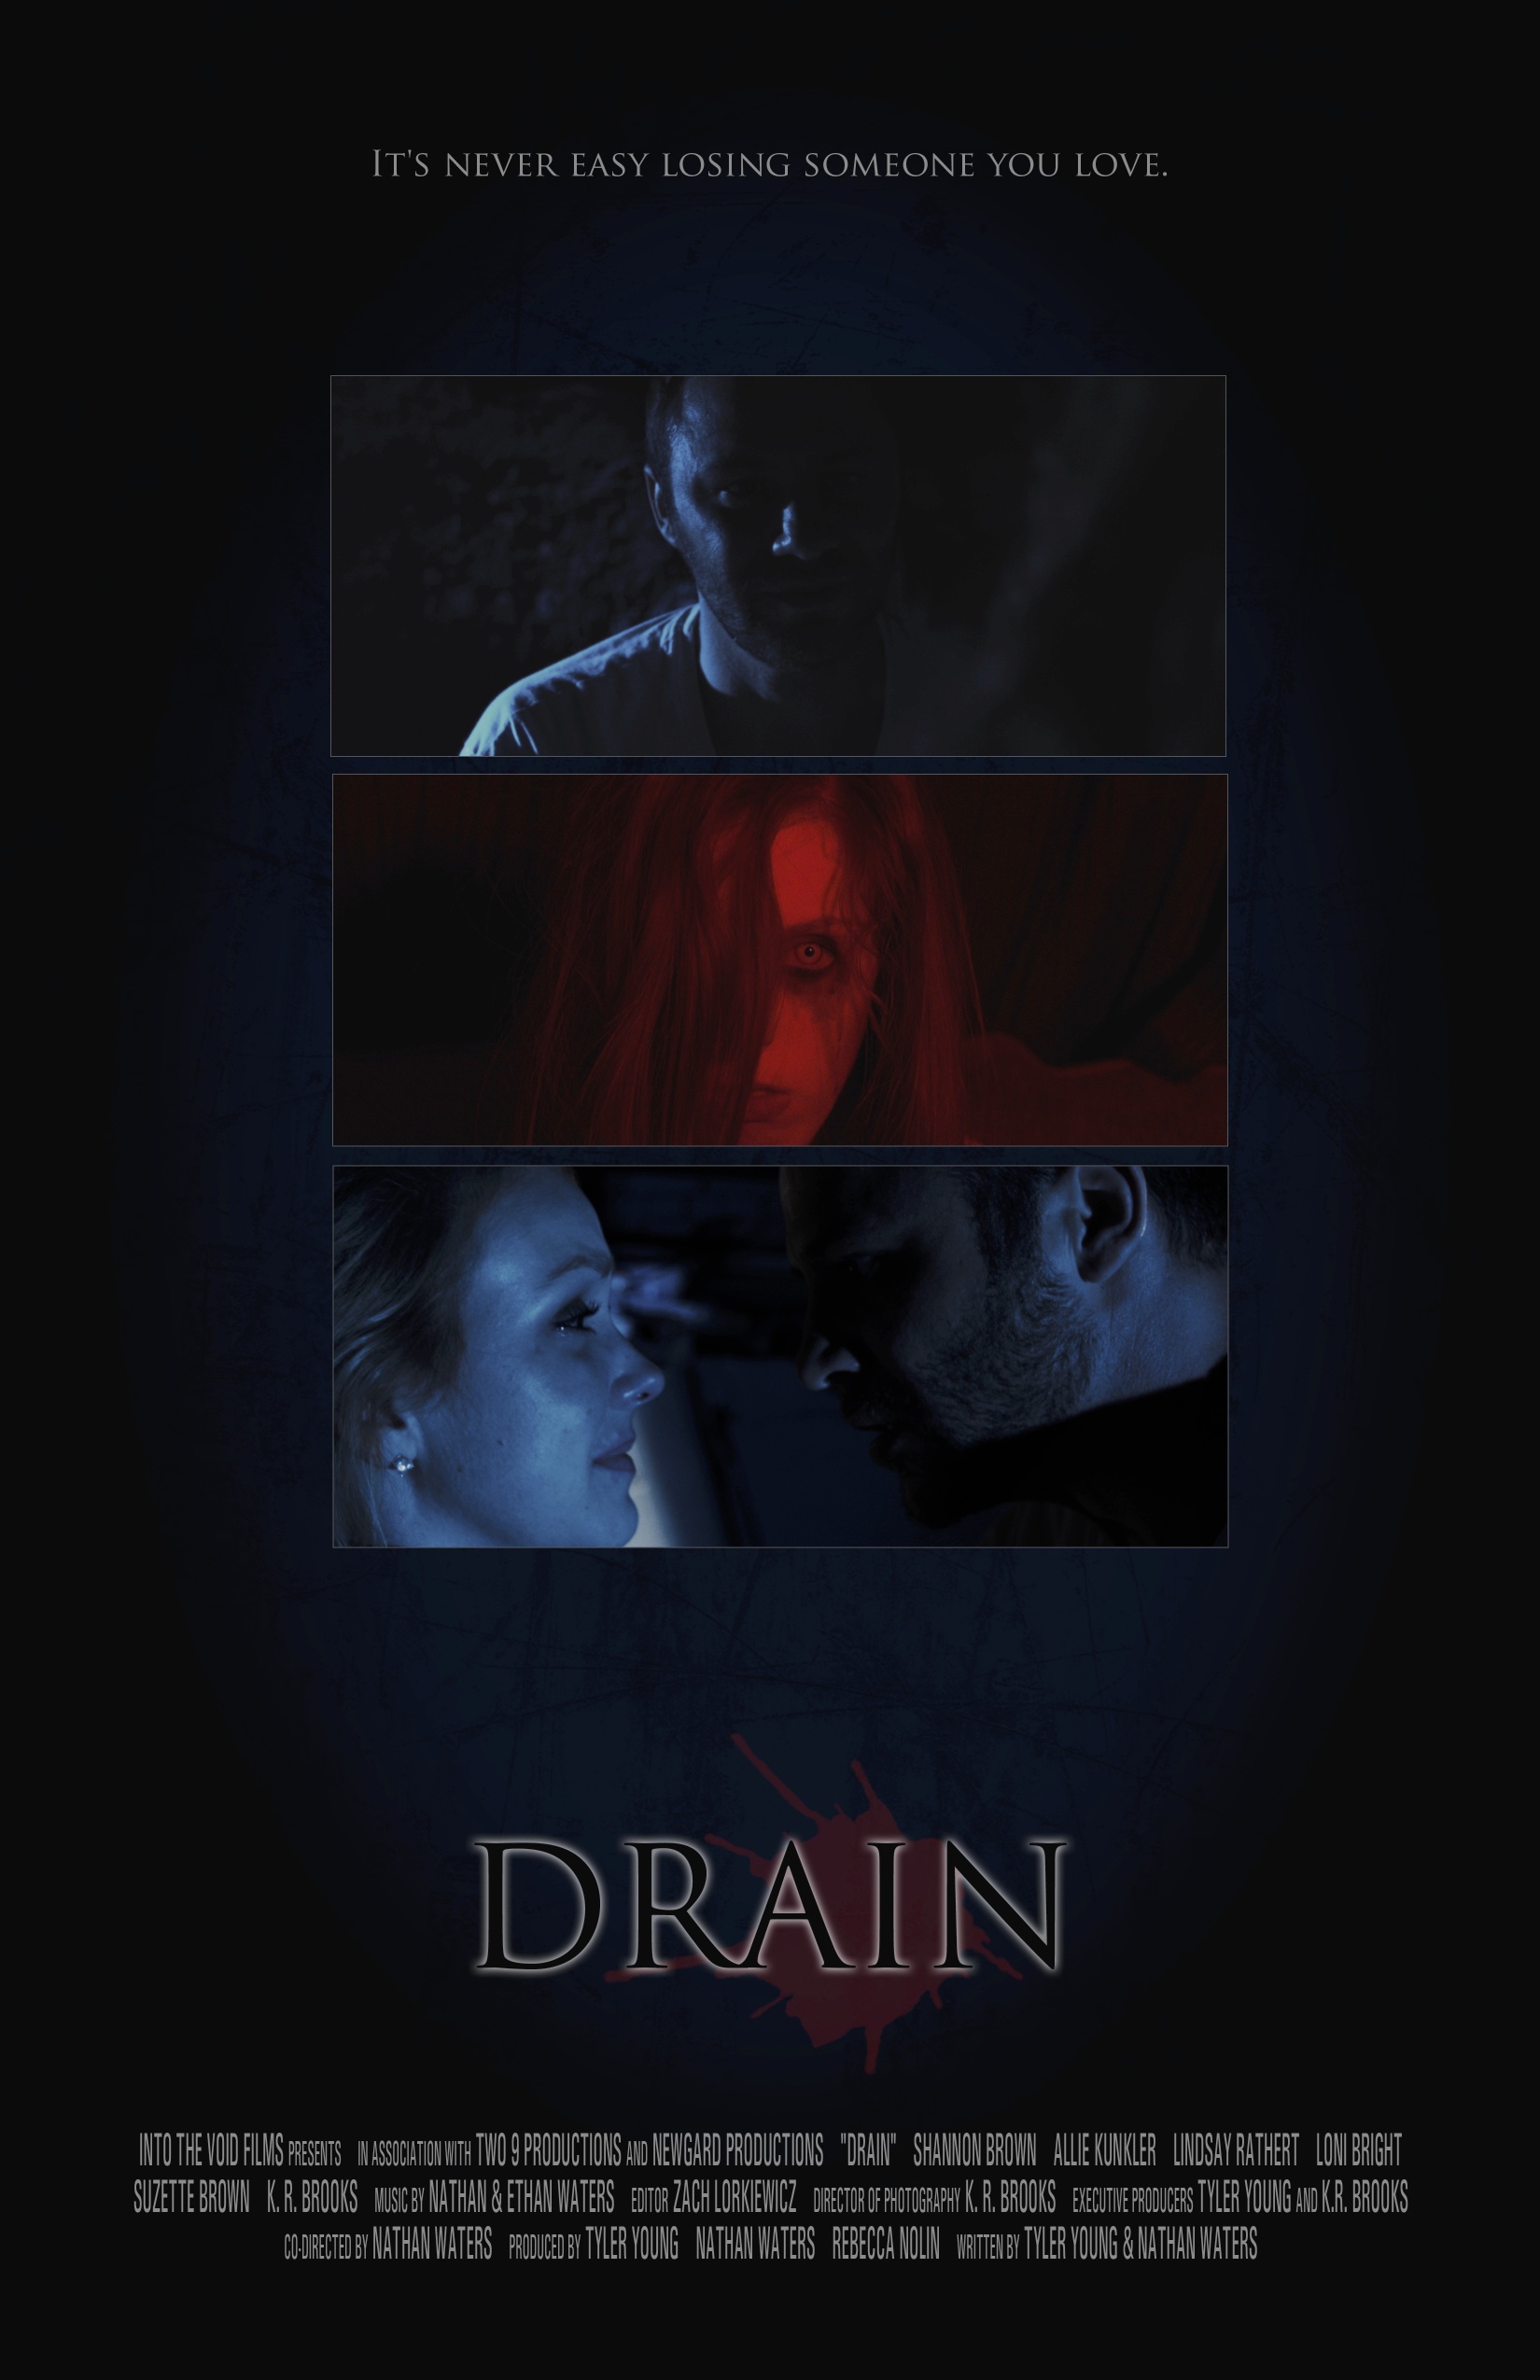 Official poster for Drain with Lindsay Rathert and Allie Kunkler